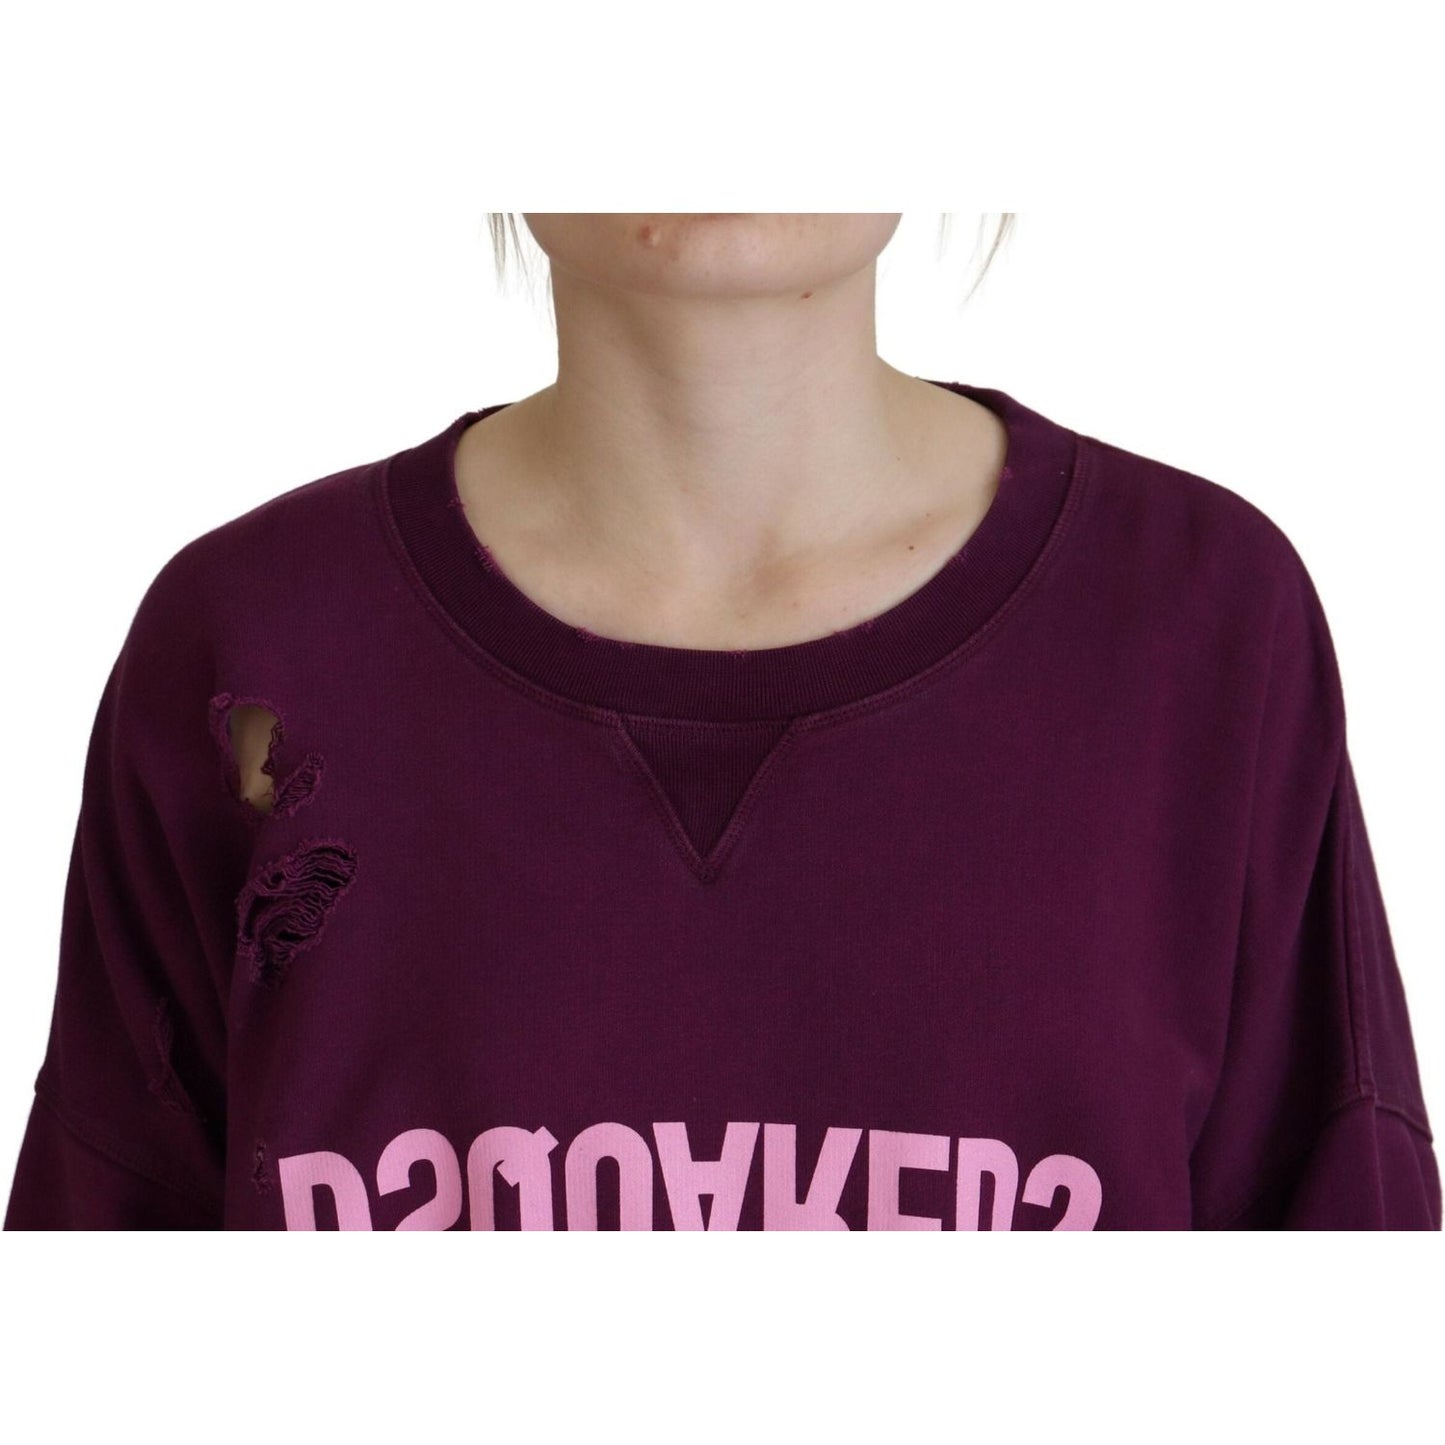 Dsquared² Purple Cotton Distressed Printed Long Sleeve Sweater purple-cotton-distressed-printed-long-sleeve-sweater